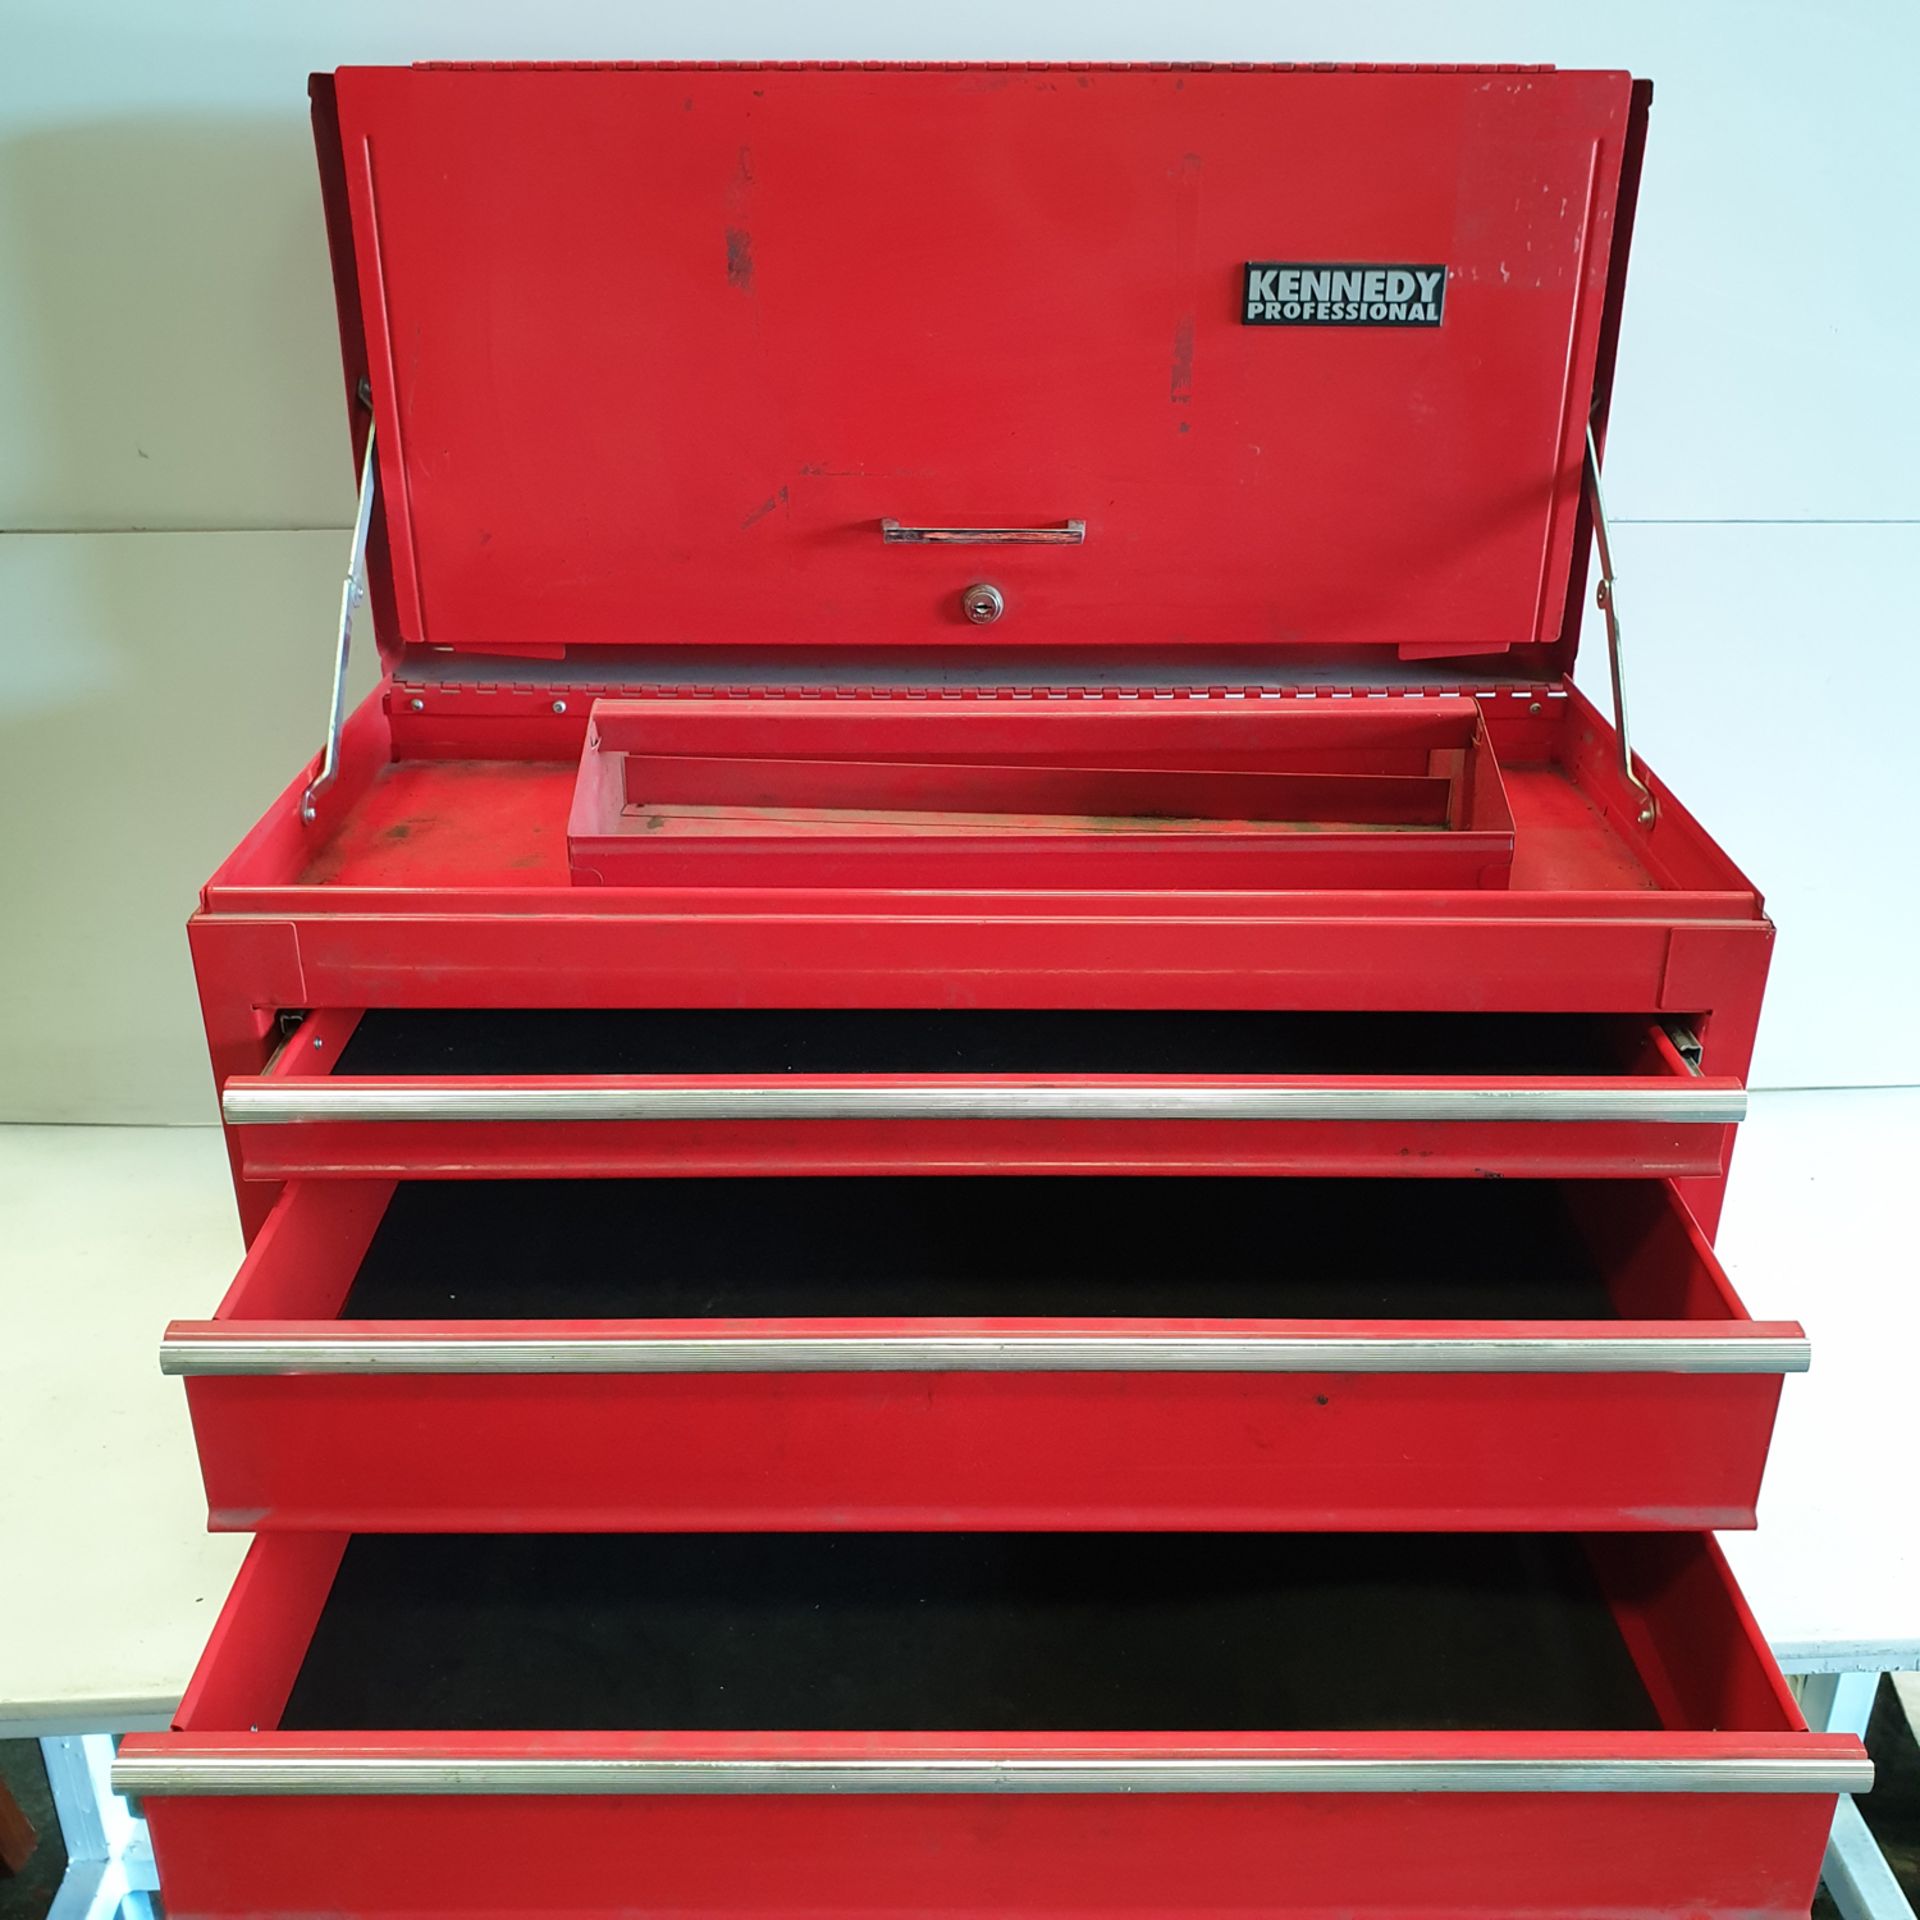 Kennedy Proffesional Steel Tool Box. Approx Dimentions 670mm x 330mm x 390mm High. - Image 5 of 7